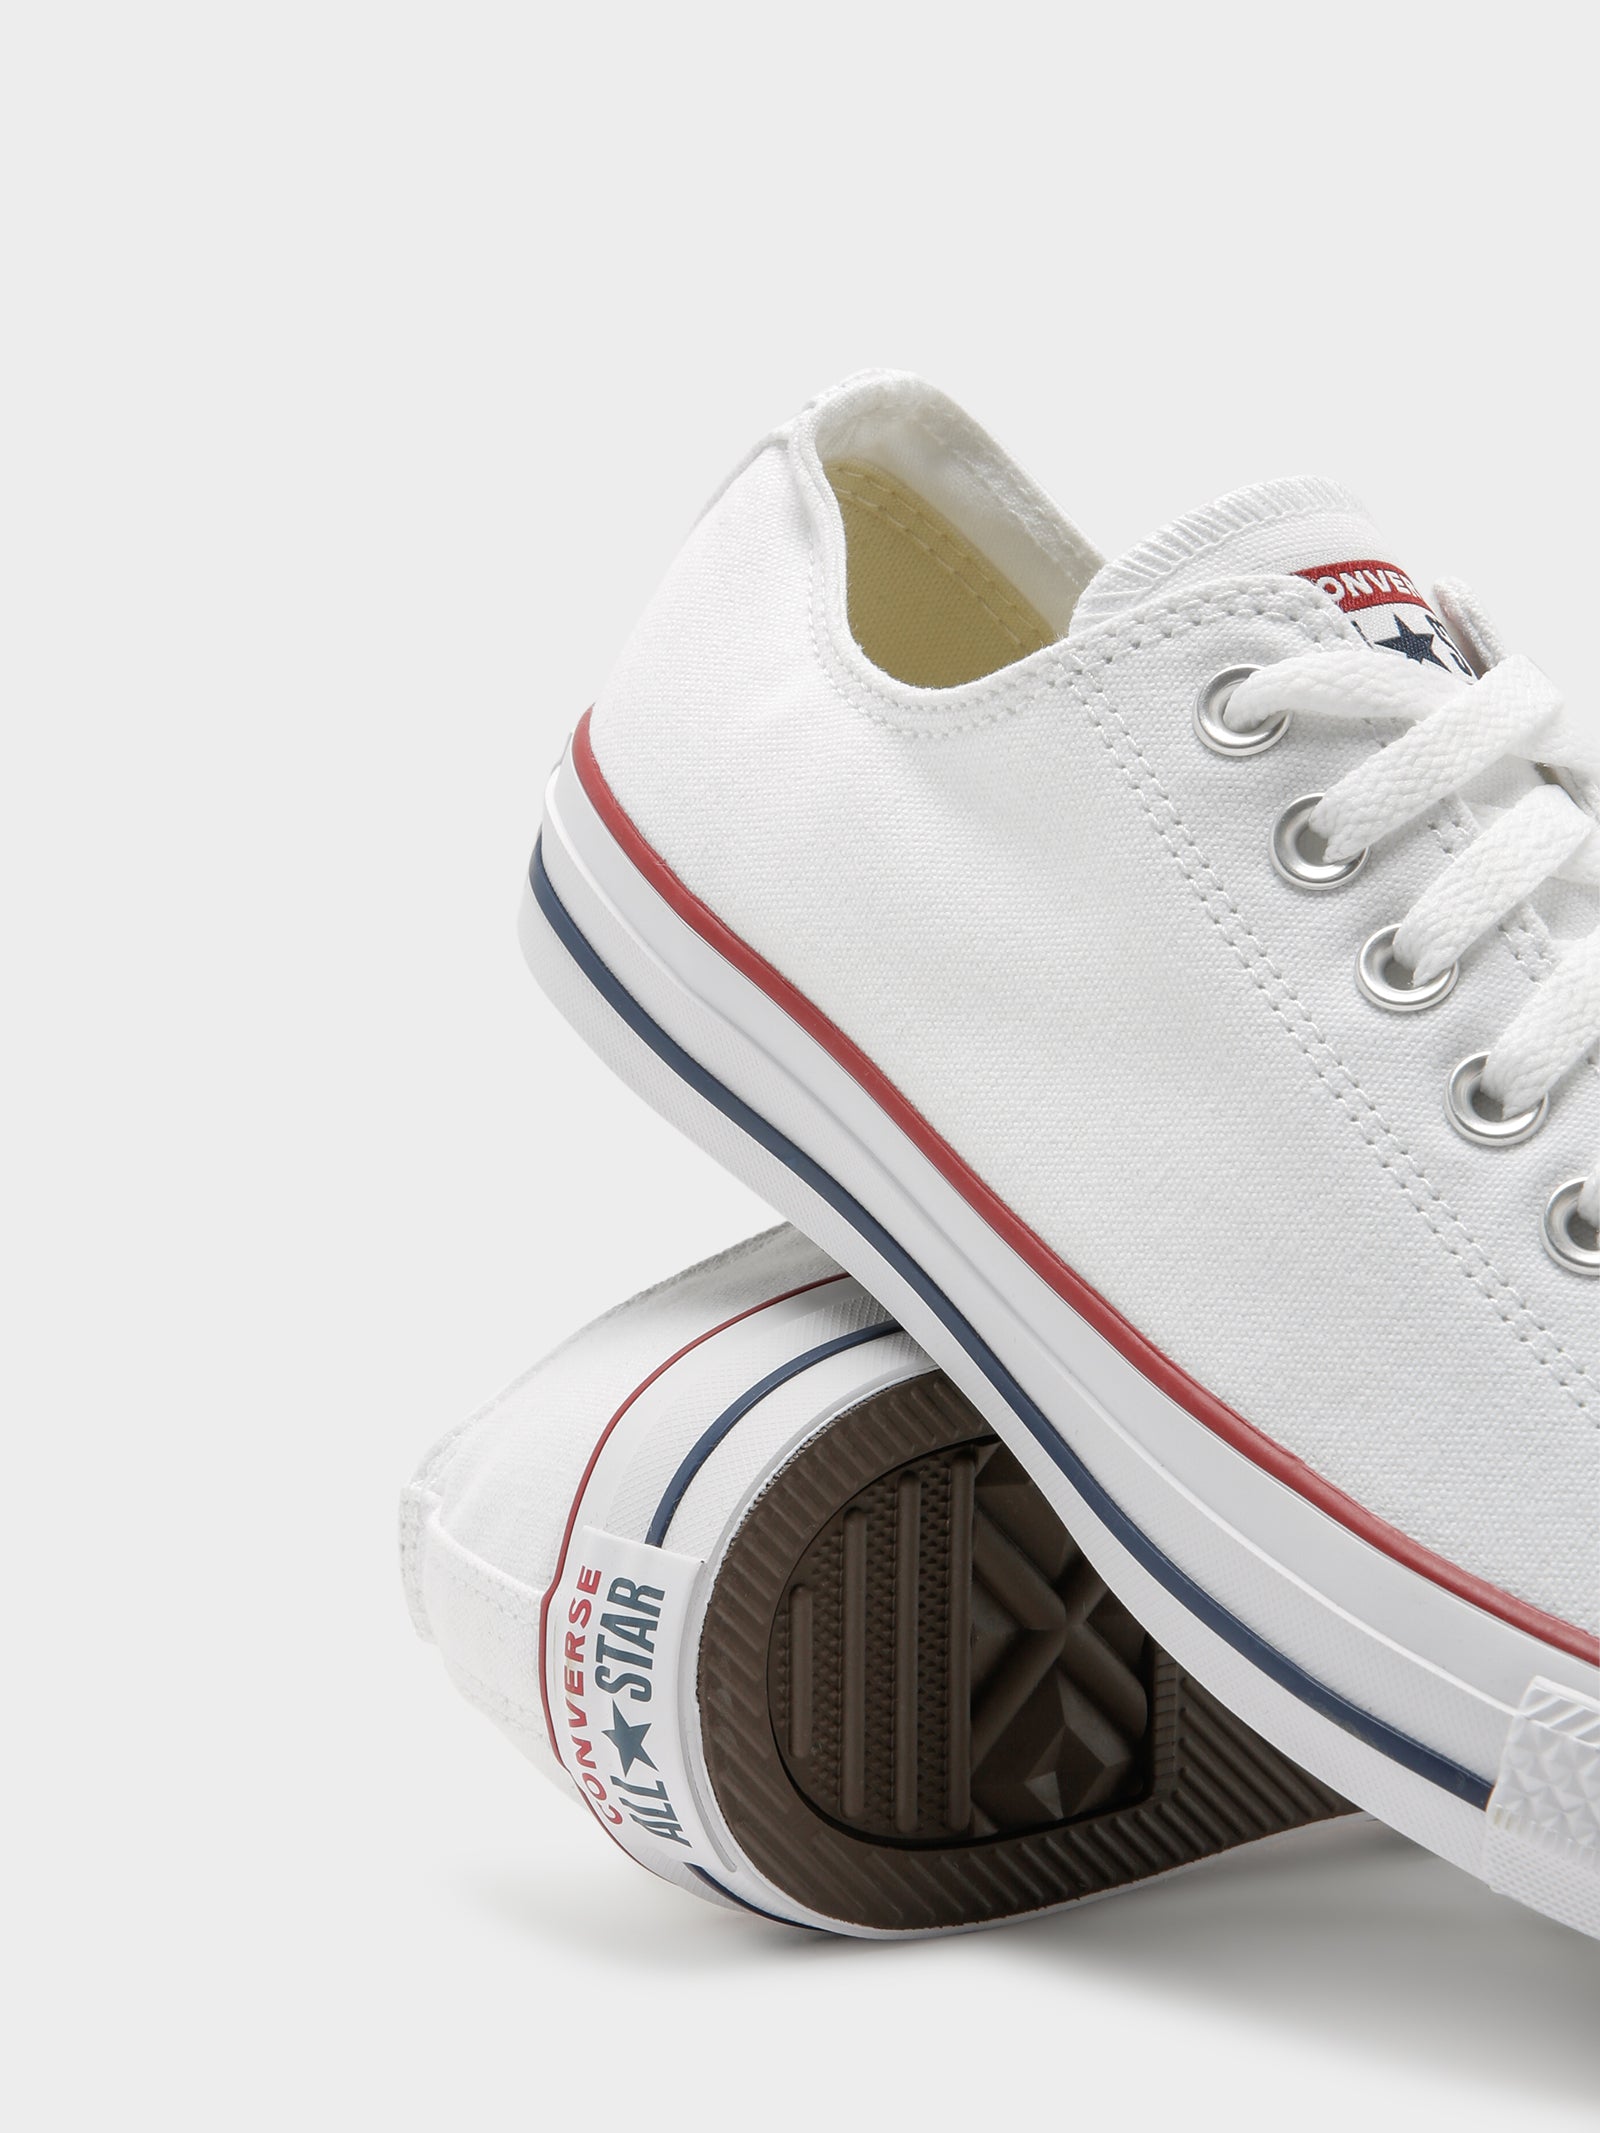 converse classic low top